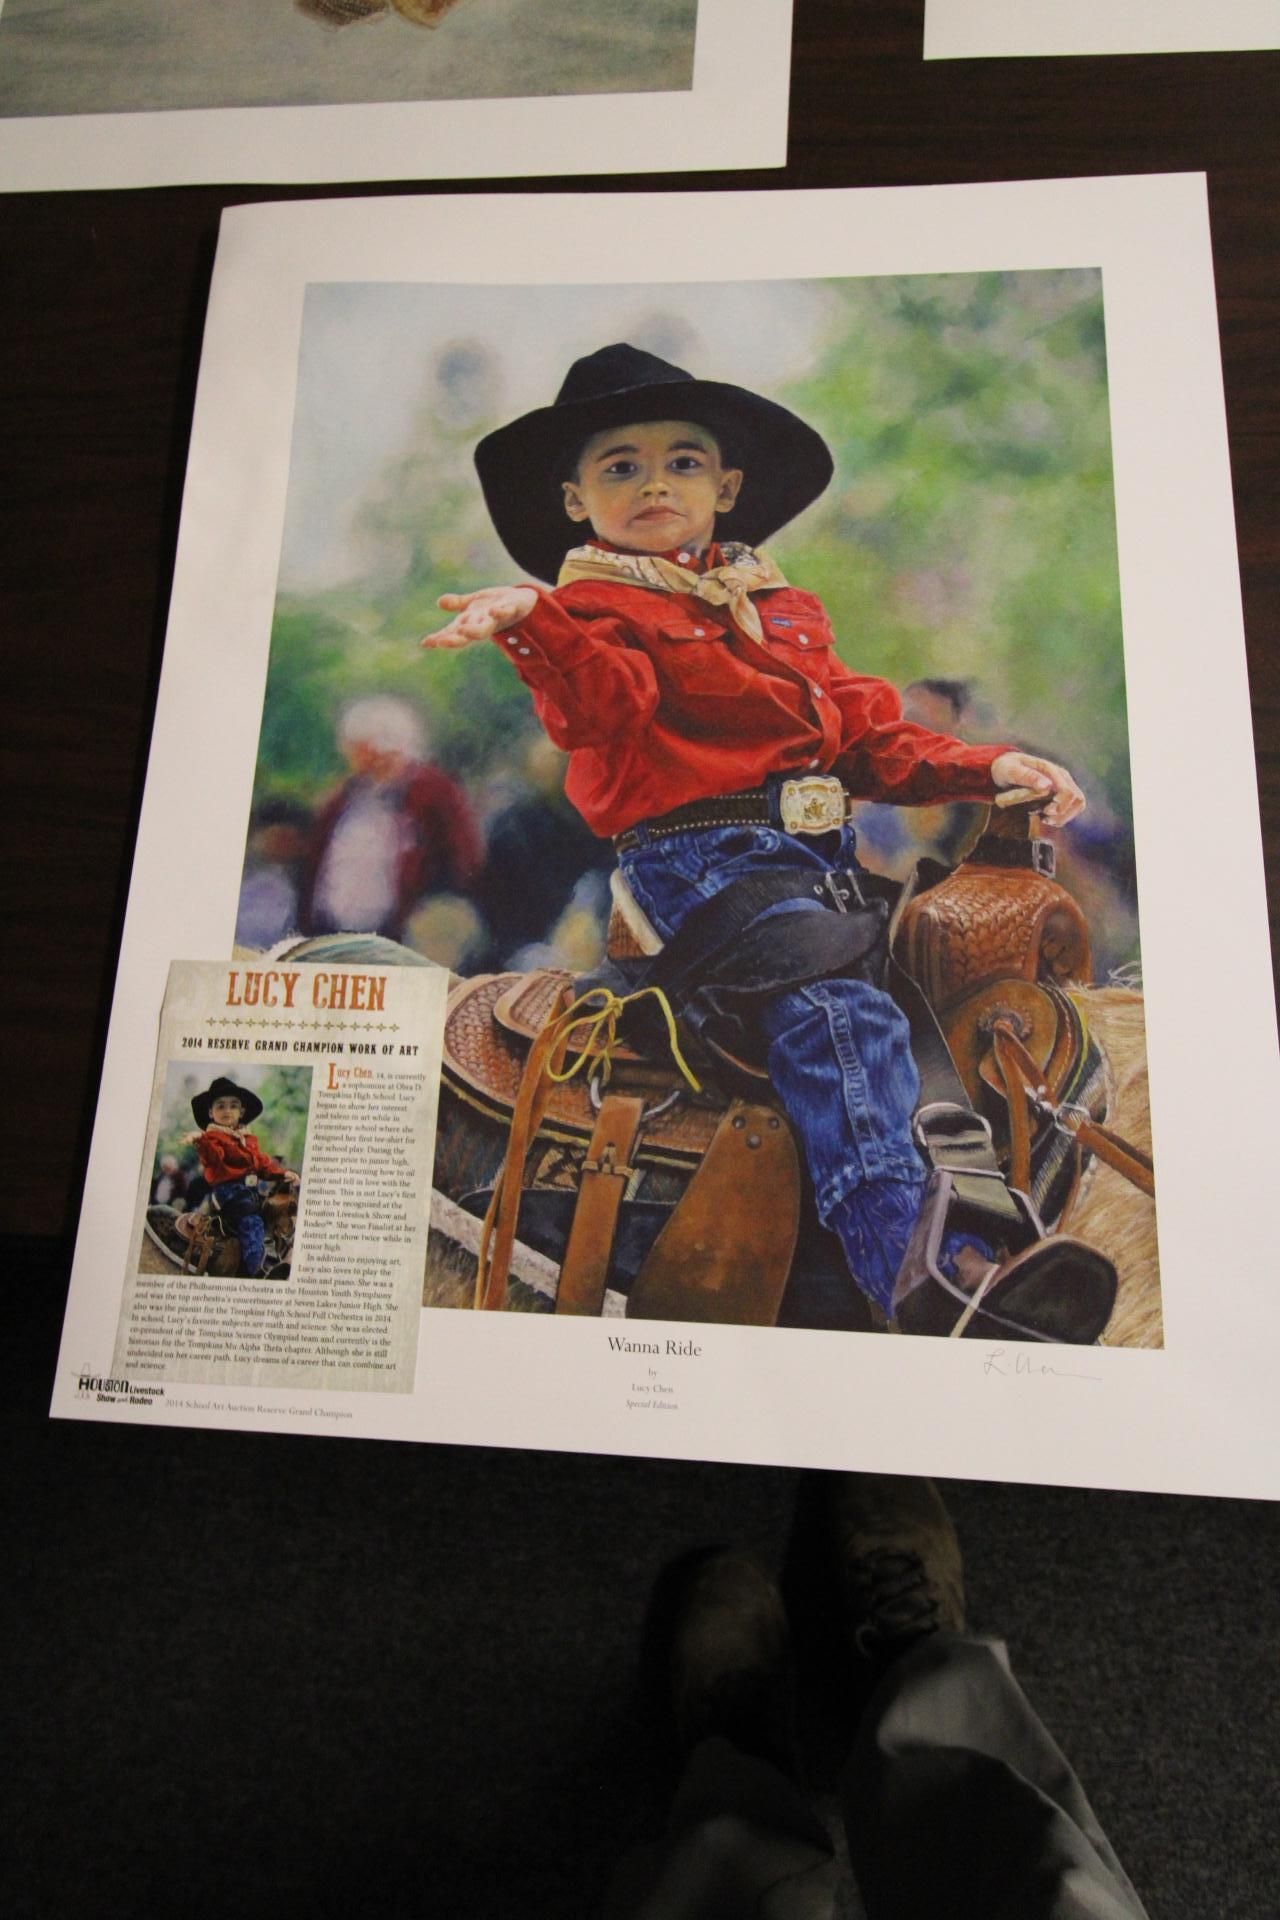 LOT OF HOUSTON LIVESTOCK SHOW, AWARD WINNING PRINTS (5), (Proceeds go to charity) - Image 10 of 11